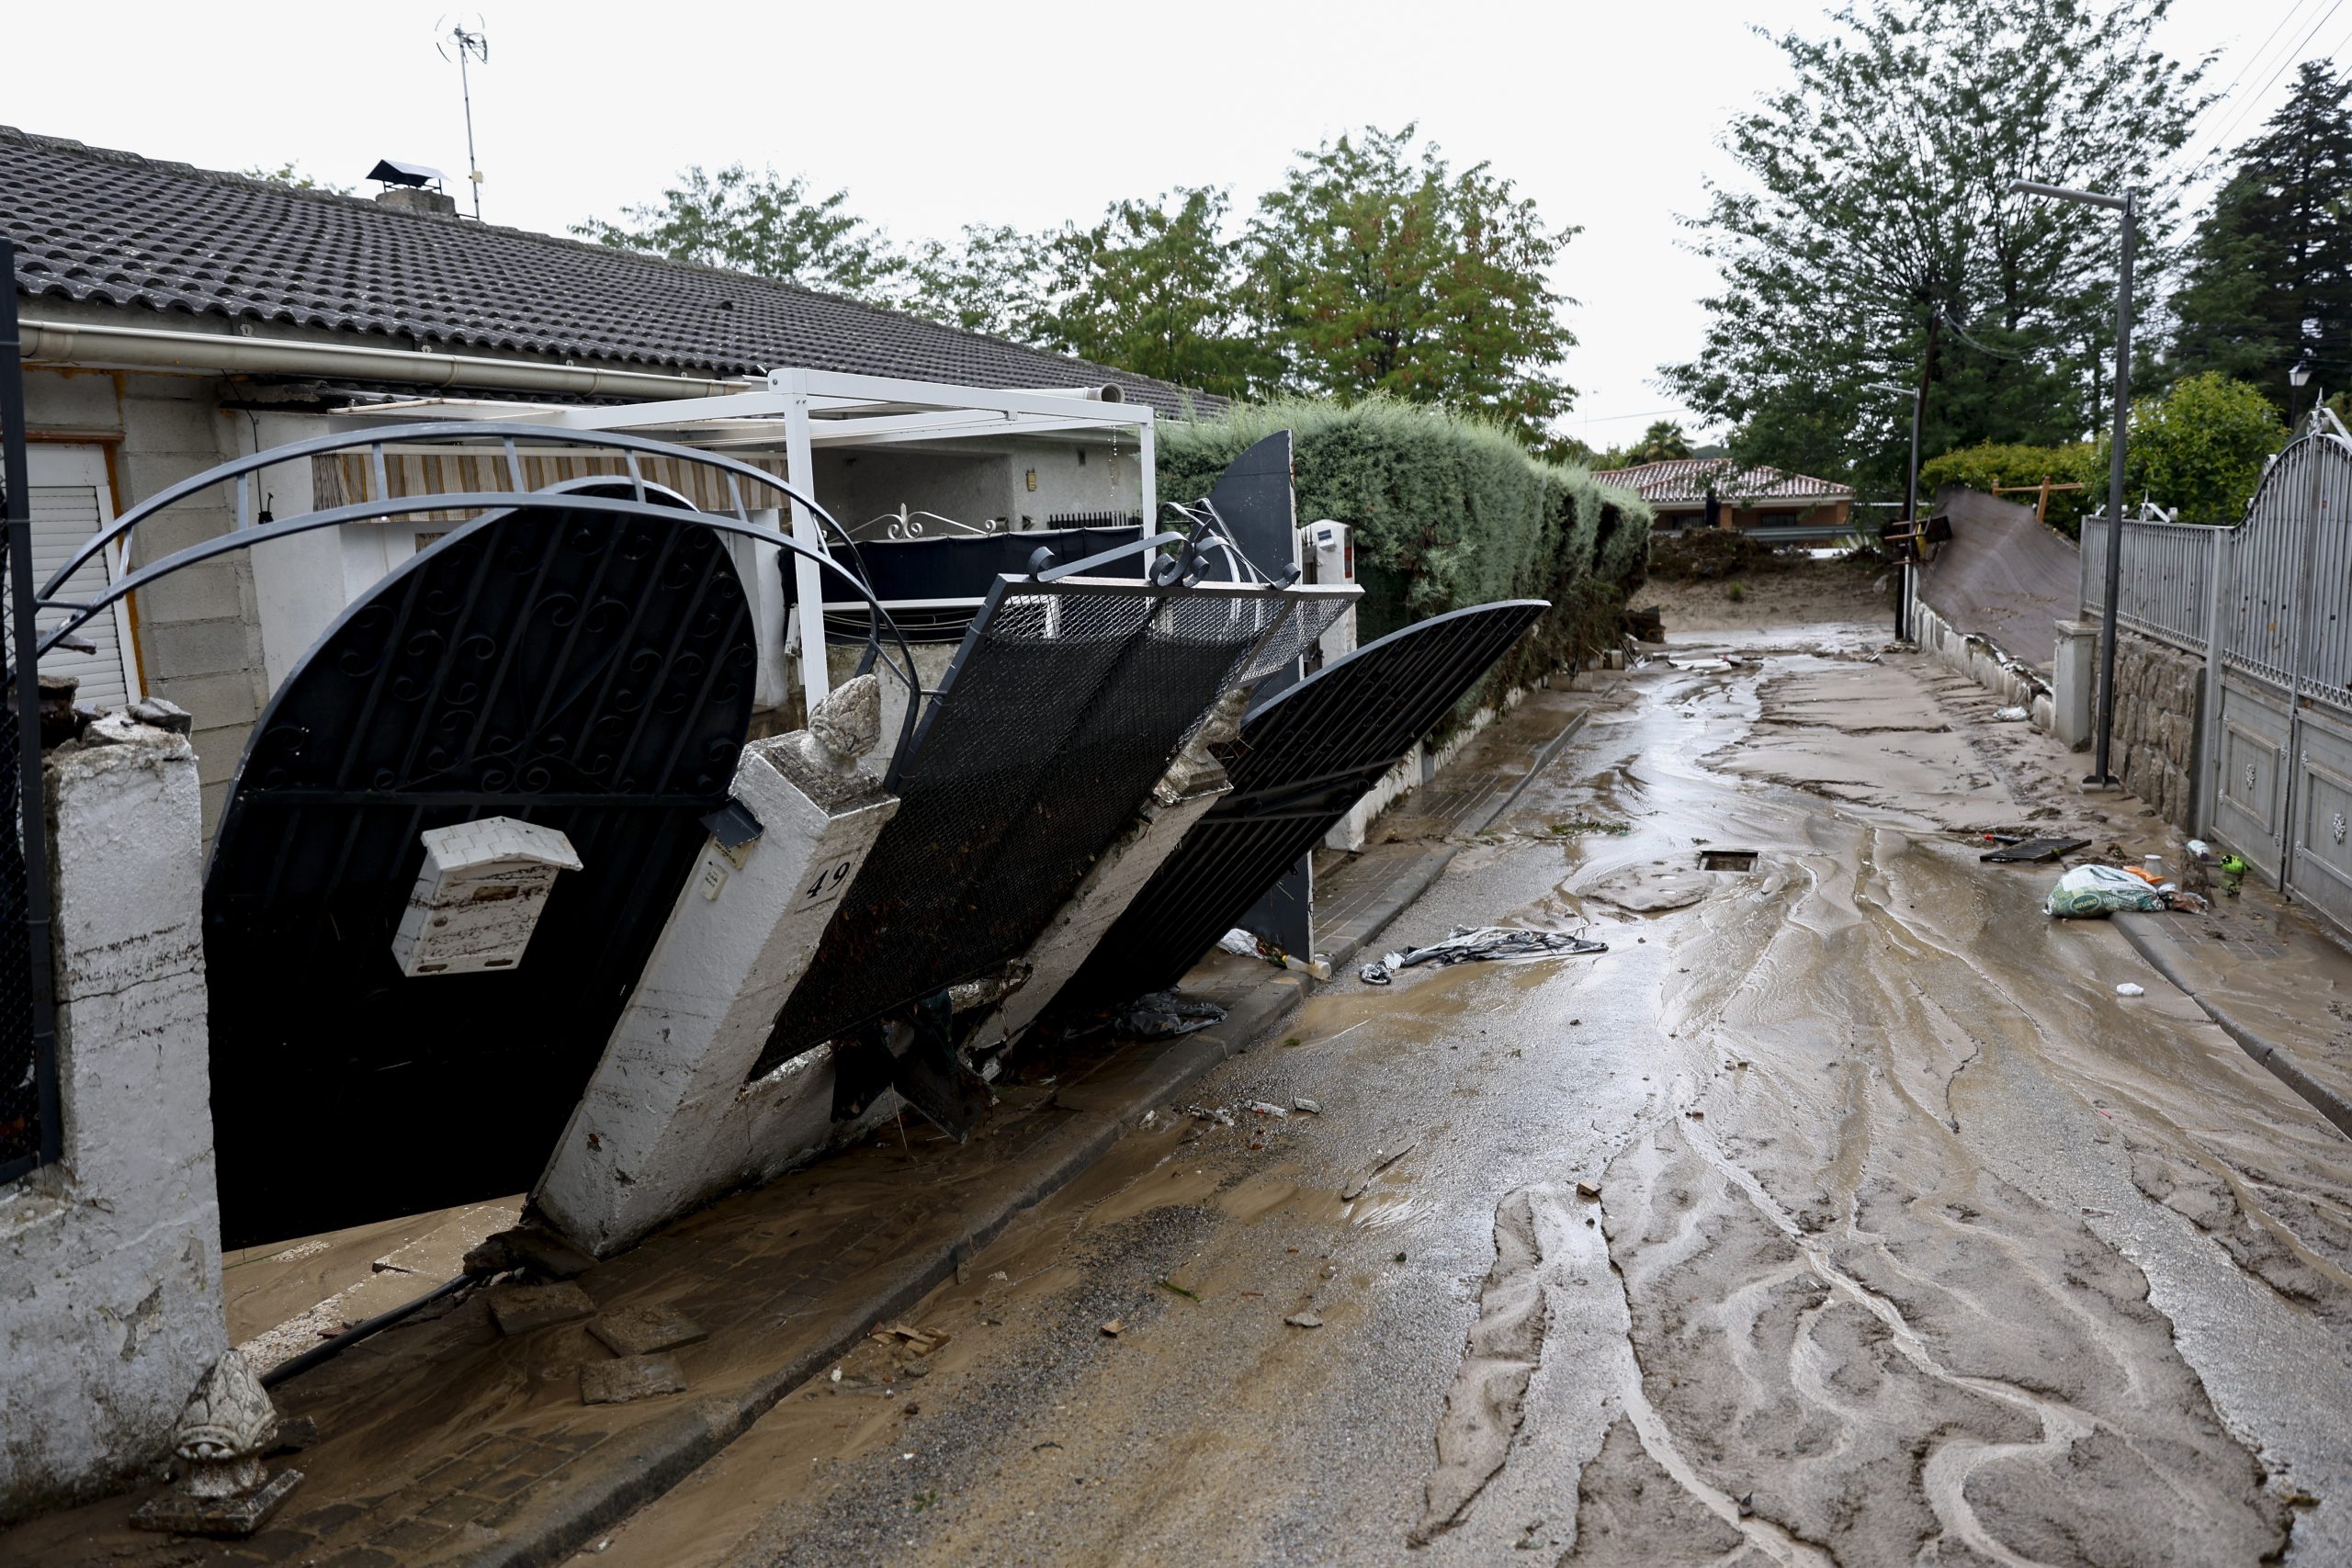 epa10839398 View of a damaged street in Aldea del Fresno after floods, Madrid, Spain, 04 September 2023. A 10-year-old boy was found alive up a tree hours after he and his father went missing while traveling with the mother and sister in a car. The family was surprised by floods in a car in Aldea del Fresno, one of the towns most affected by floods in Madrid region.  EPA/RODRIGO JIMENEZ